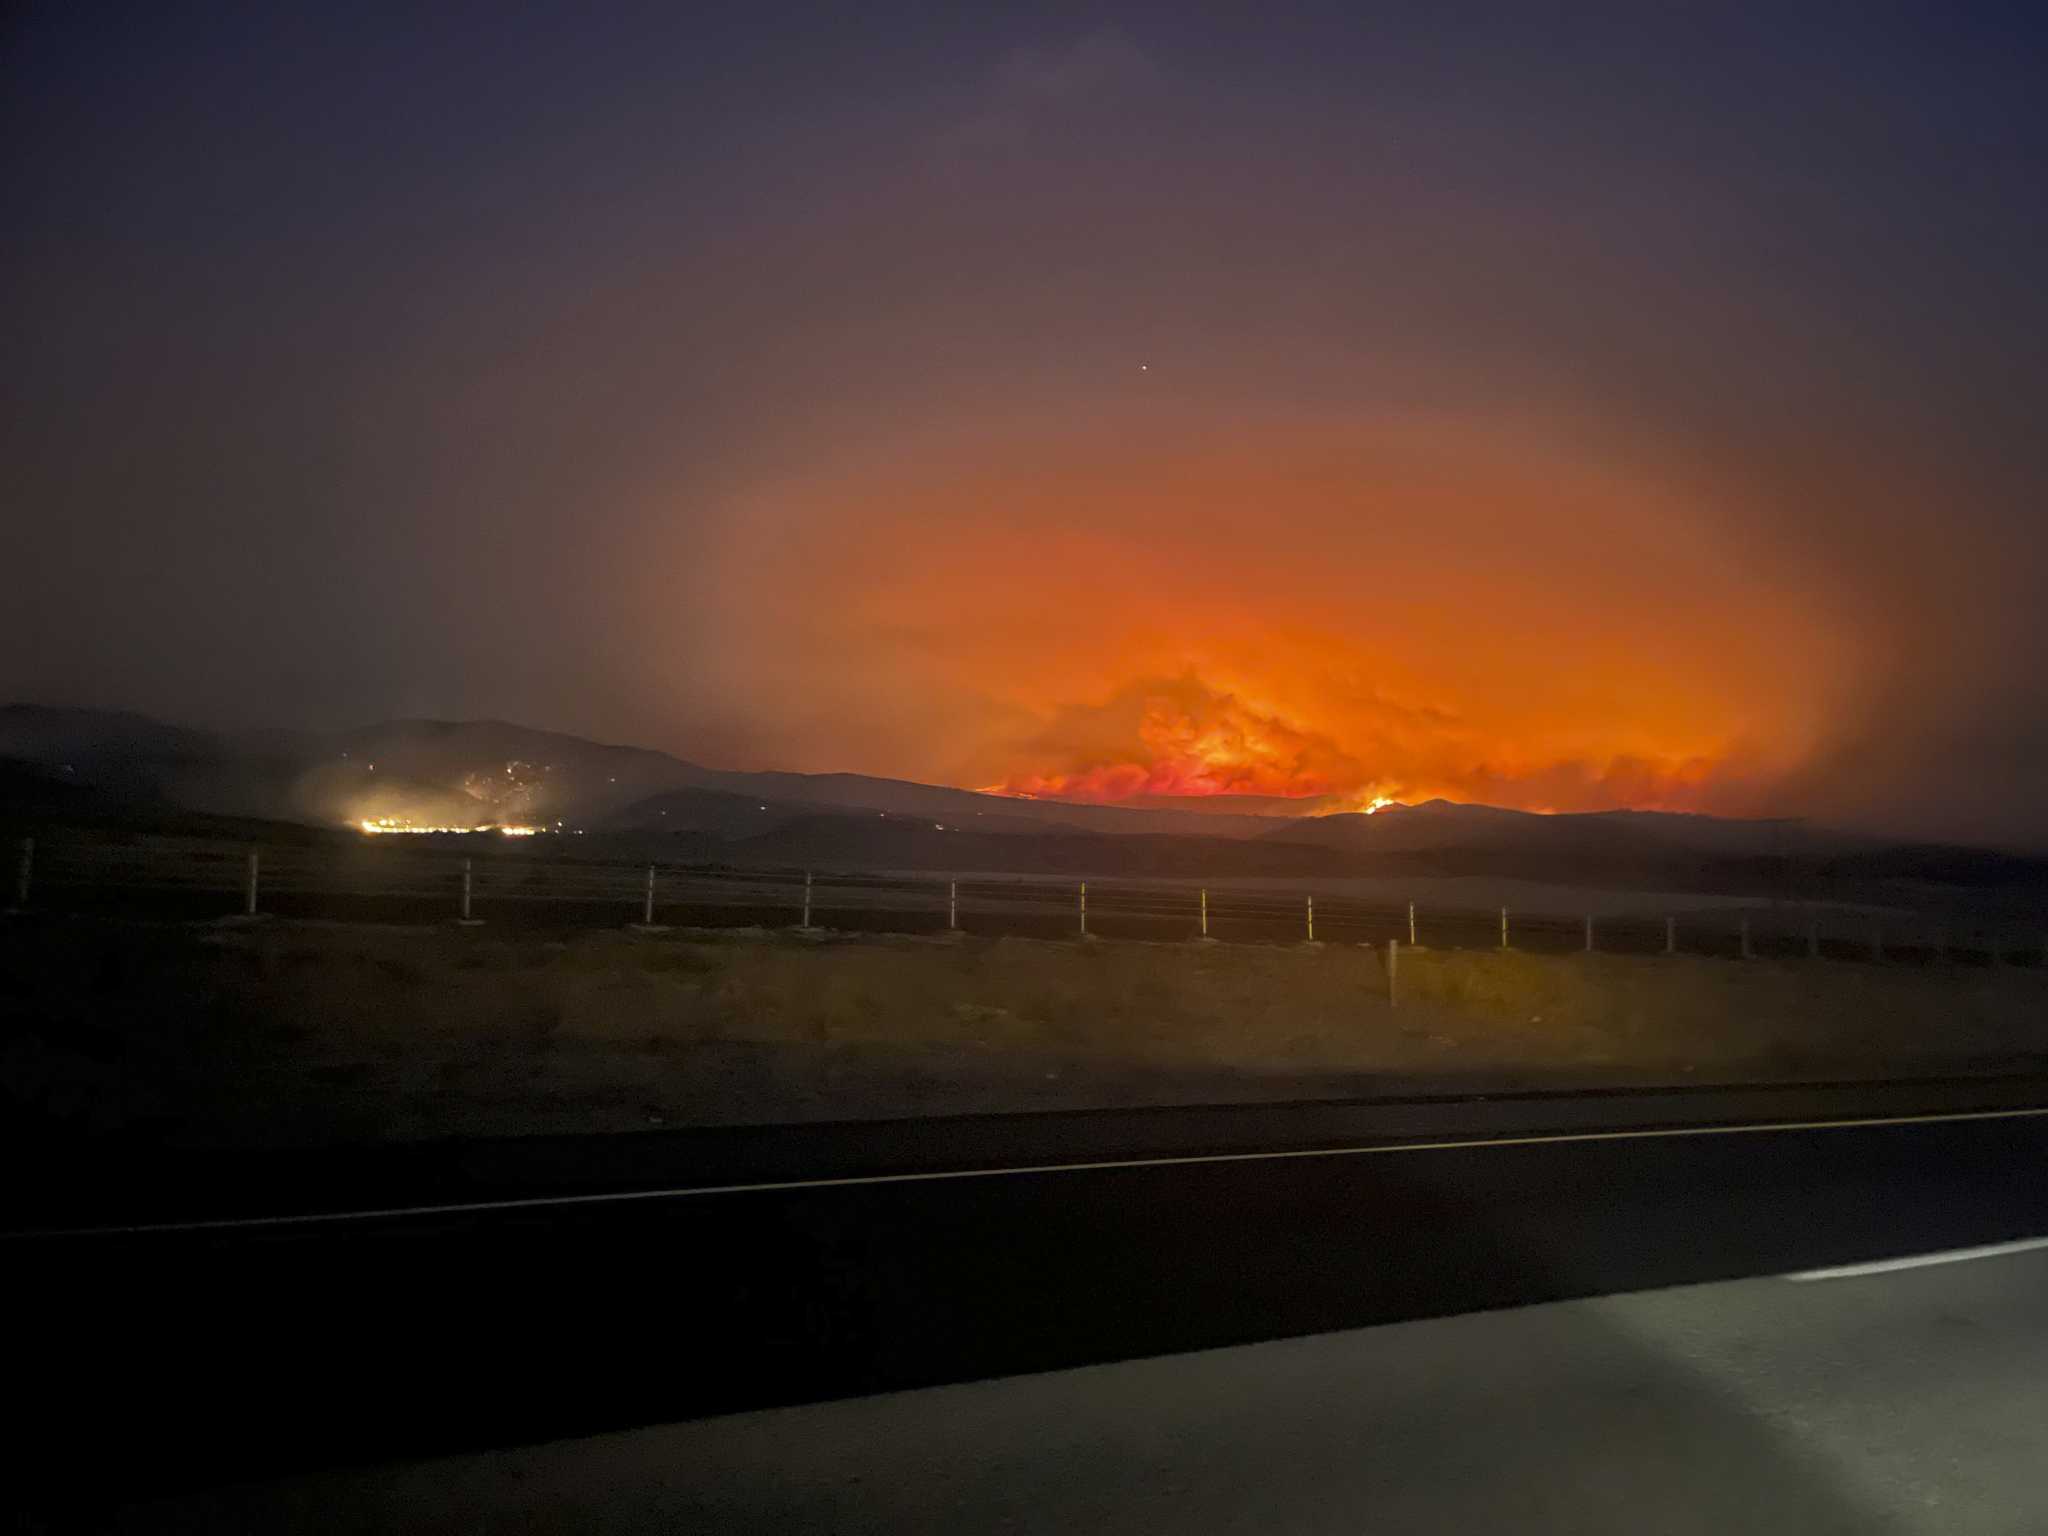 Wildfires threaten communities in the West as Oregon fire closes interstate, creates its own weather